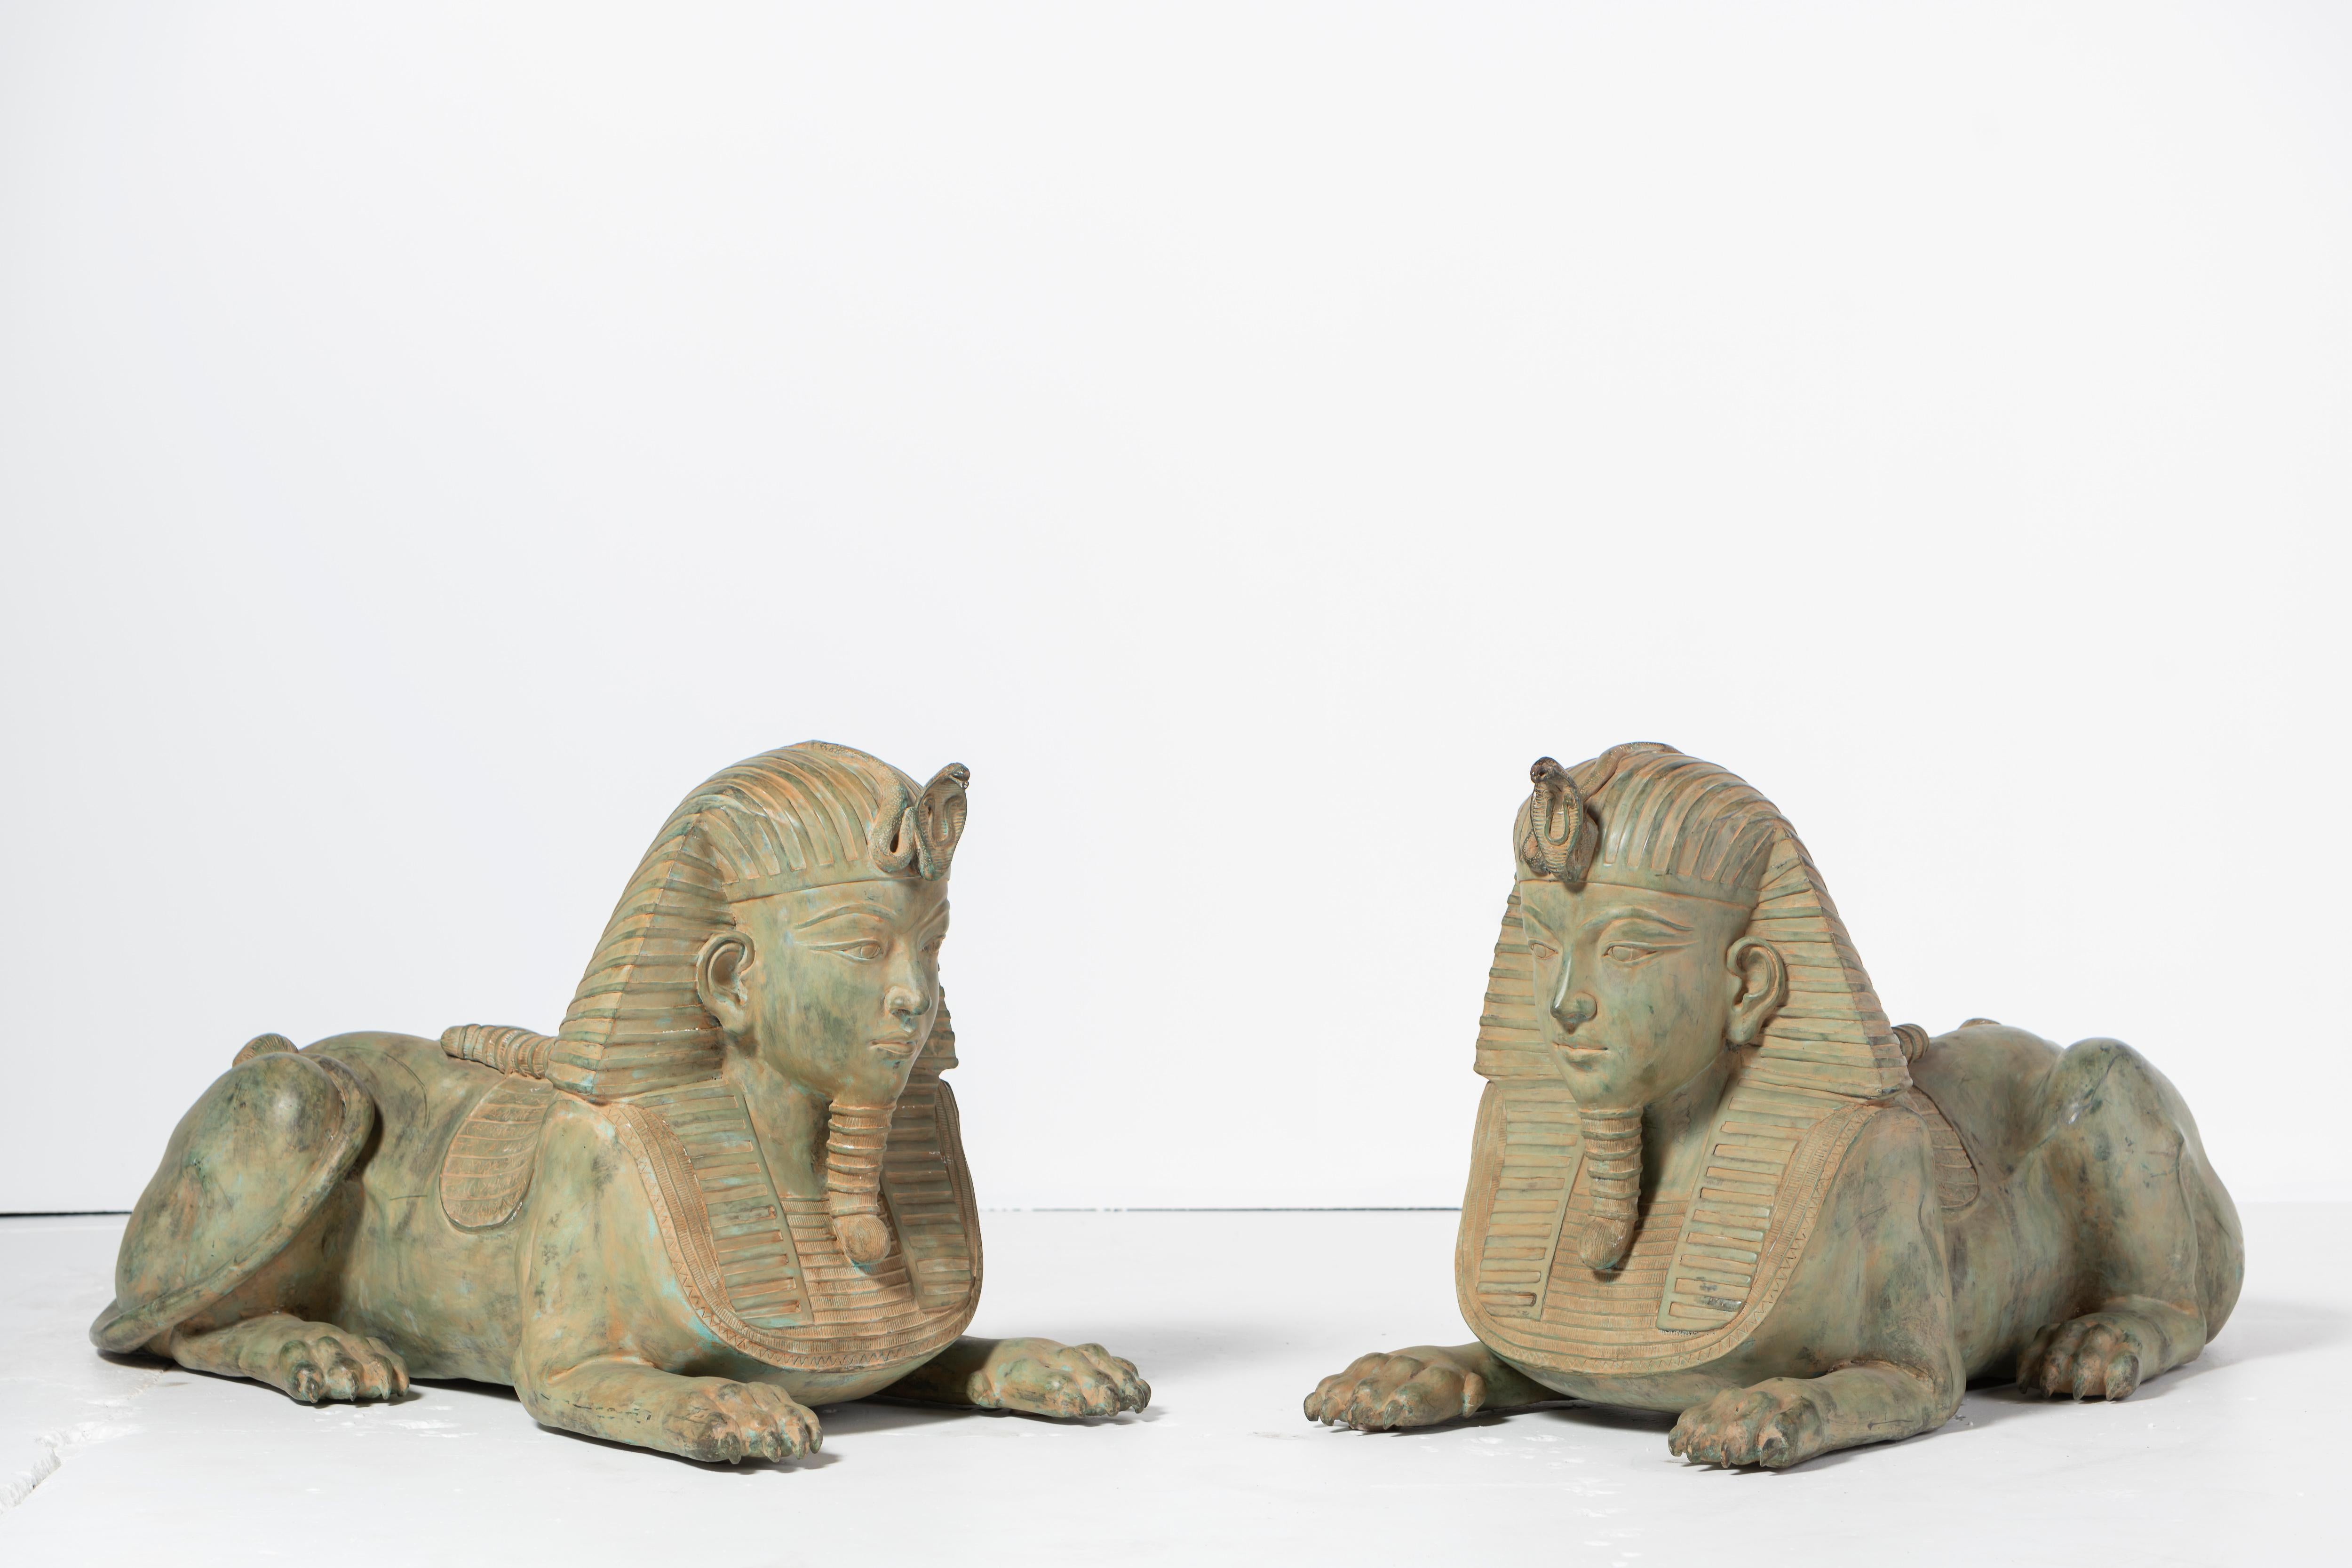  Pair of Grand Tour Style Large Patinated Figures of Seated Sphinxes For Sale 9